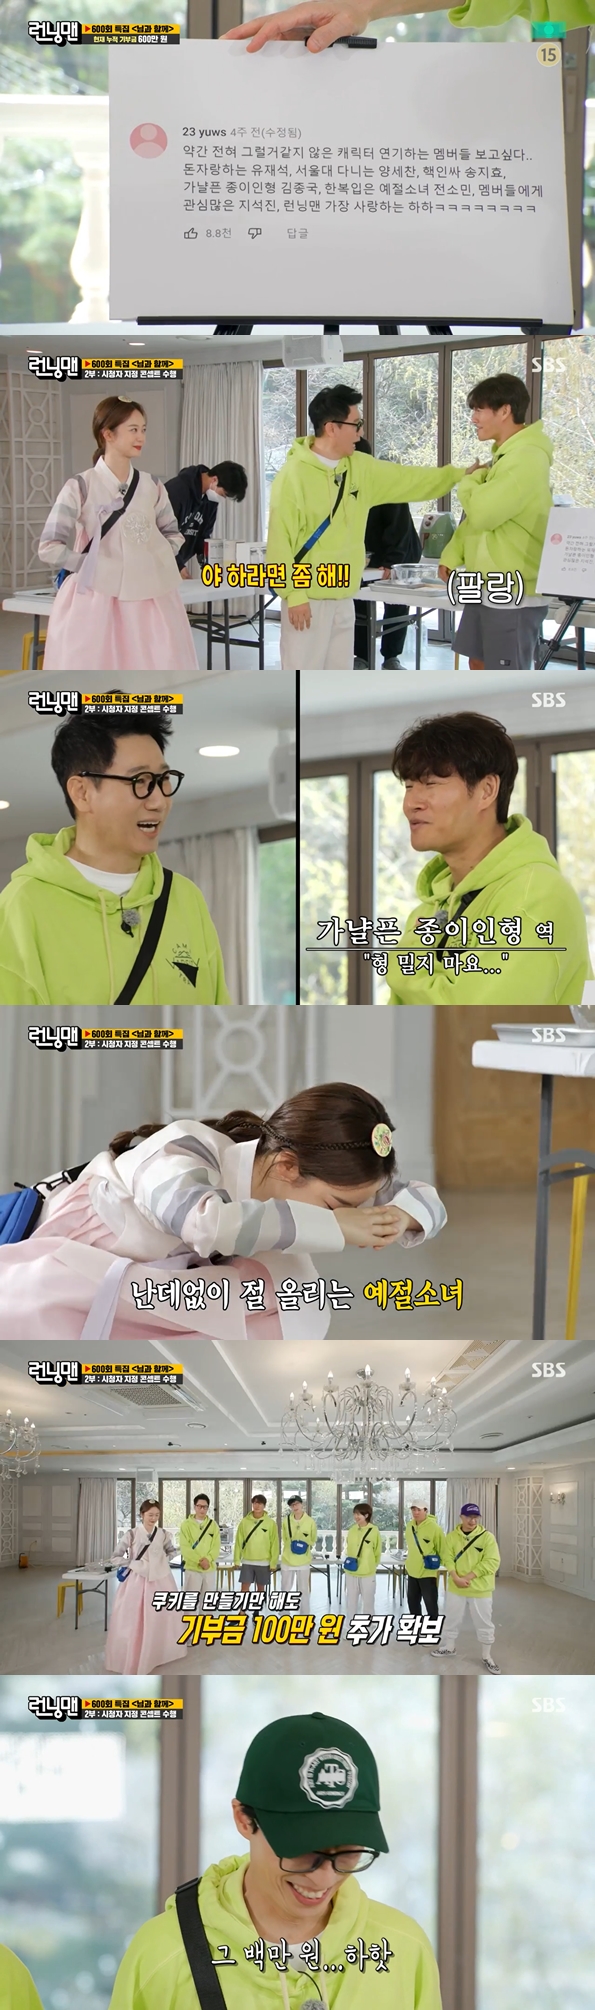 Running Man gave a thank-you to viewers for the 600th special feature and donated 7 million won for low-income people.Yoo Jae-Suk reveals why she doesnt do SNS and The Messenger ServiceSBS Running Man, which was broadcast on the 24th, was featured 600 times and race was held with the audience.In the first part, the audiences Q&A section was held, and in the second part, the character acting was not likely at all due to the request of the audience.The production team received questions from viewers through the official SNS of Running Man and had a question and answer time comfortably.The first question was whether Yo Jae-Suk, who is known to not do SNS, has a secret account.This is because Yo Jae-Suk was aware of all the SNS news of the members without SNS.Yoo Jae-Suk said it first identifies information through an internet cafe.When the members suspected that they knew too much detail, Yo Jae-Suk replied, Lets take that.Yoo Jae-Suk denied the SNS secret account until the end, saying, I have seen all the things I can see on YouTube these days.When the members asked, Why dont you do SNS? Yo Jae-Suk replied, I dont know why youre doing SNS. Then he said, SNS has to keep up the photos.I dont like to upload that picture, he said.Yoo Jae-Suk then also revealed why he did not use The Messenger Service; Yoo Jae-Suk said, Its annoying.But when I do, I get a number that I know. I come up with a few conversations in the group room. When Kim Jong-kook said, There are times when group chat rooms are fun, Song Ji-hyo said, I do not want to give up the rest for that little fun.The two are the only members of Running Man who do not use The Messenger Service.Yoo Jae-Suk agreed to Song Ji-hyo, You are logical.Then came questions asking about the secret of Ji Suk-jins steel mentality, the feelings of Yang Se-chan, who had been tearful of the Grand Prize.Ji Suk-jin reveals he is not hurt because he believes other members are not sincere when they tease him.Yang Se-chan revealed that the burden was high when he joined the early Running Man.I did nothing at the real weekend entertainment, but it was so hard all the way to the car that my brothers did well when I went home, he said.There are people who need time, Im a case like that, it took me nine years, Yoo Jae-Suk comforted Yang Se-chan.But Yoo Jae-Suk flipped Yang Se-chans stomach by saying he received comments from viewers saying what is it and thats what it is and getting paid.Yang Se-chan said, Im going to go. Hey, how much! Ill pay for it. Ill pay for it.Finally, Yoo Jae-Suk said, So what I want to say is that Sechan has been so good as we expected, but it took time.Part 2 was conducted as Mission, which plays characters that are not likely to do at all.The usual modest Yoo Jae-Suk is a character who boasts money, the Yang Se-chan is a male character who lacks common sense, the introspective Song Ji-hyo is a nuclear in-sat character, the muscle man Kim Jong-kook is a slender paper doll, the 4-dimensional Jeon So-min is a hanbok-weared etiquette girl, the Ji Suk-jin is a tough character, He took on a character who loved Running Man.The first Mission was revived by Ji Suk-jins cooking class at the request of viewers.Ji Suk-jin pushed Kim Jong-kooks chest, rejecting the cooking class, and shouted, If you have to do it!Kim Jong-kook laughed at the crying Do not push my brother.Jean So-min emphasized etiquette by raising the temple without a glance, and Song Ji-hyo showed off his insammy by shouting the extension Boombarstick.Yoo Jae-Suk laughed and showed off his wealth by saying that million won at the PDs donation of 1 million won.Haha, who cares about Running Man, was saddened that he should stop cooking classes.The second Mission went to Mission, which did not knock over the bowling pin, and the third Mission went to Mission, which hit the table tennis ball and turned off the candle.Running Man members joined forces to celebrate the 600th anniversary to create a miracle to draw candles with a table tennis ball and donated 7 million won to the Central Provident Fund.Song Ji-hyo was selected as the final winner.Song Ji-hyo has the authority to send coffee tea to the desired shooting scene and donate donations to low-income children in his name.The final penalty was Ji Suk-jin, who wrote a letter thanking viewers after everyone left work.